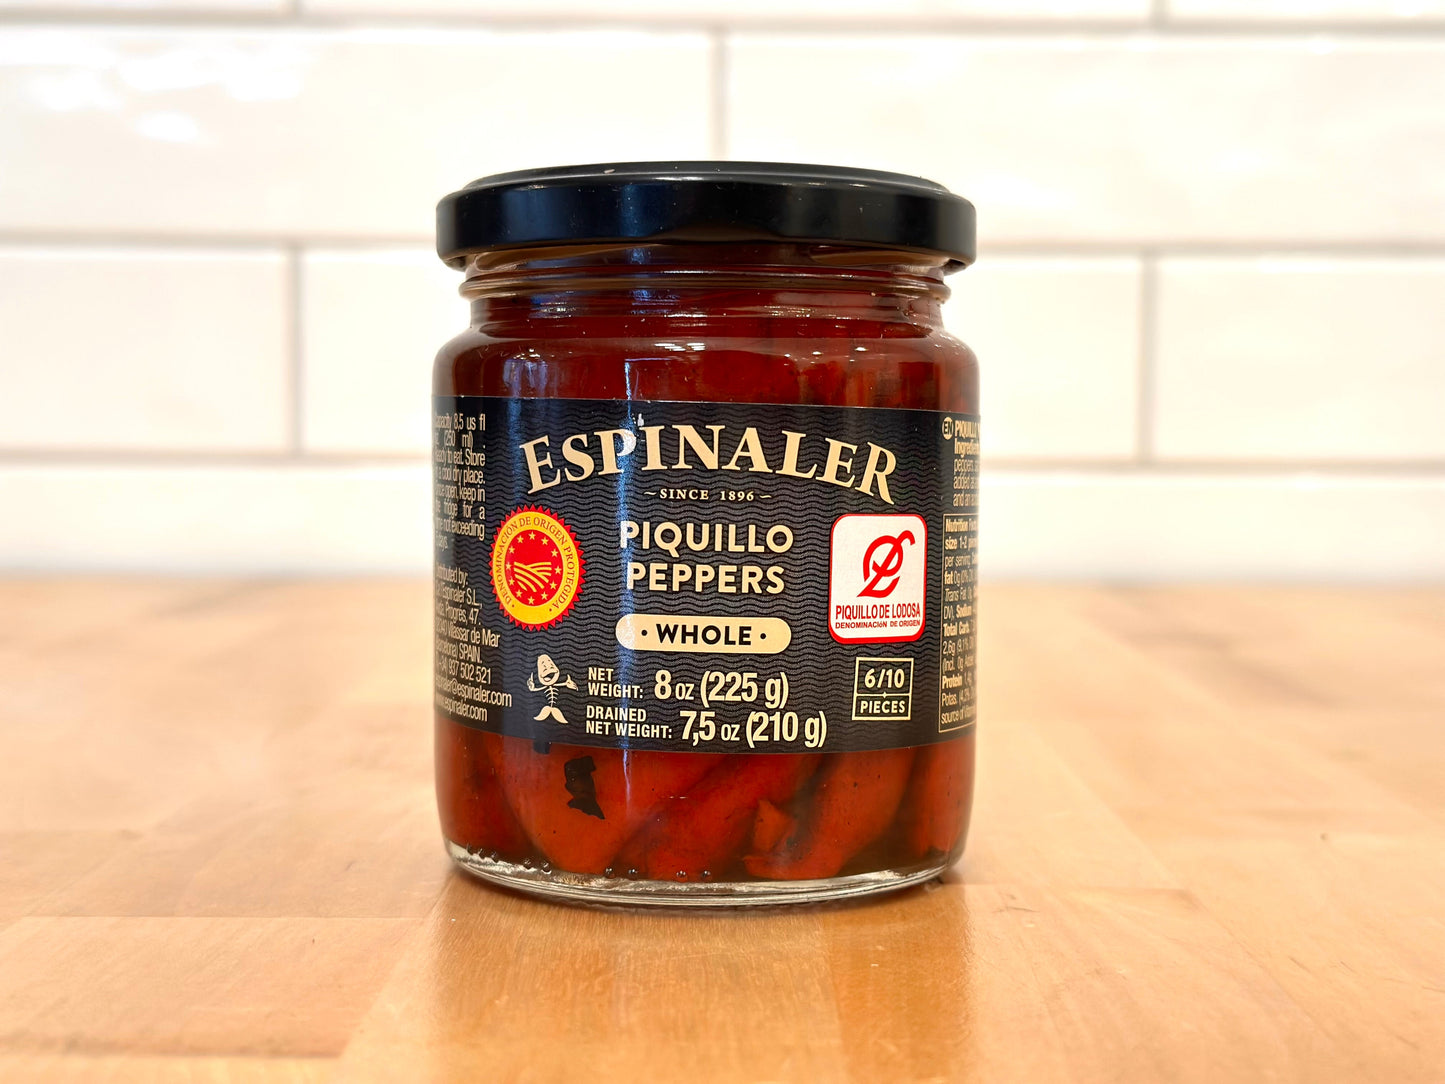 Espinaler Whole Piquillo Peppers Lodosa, Spain (225g)